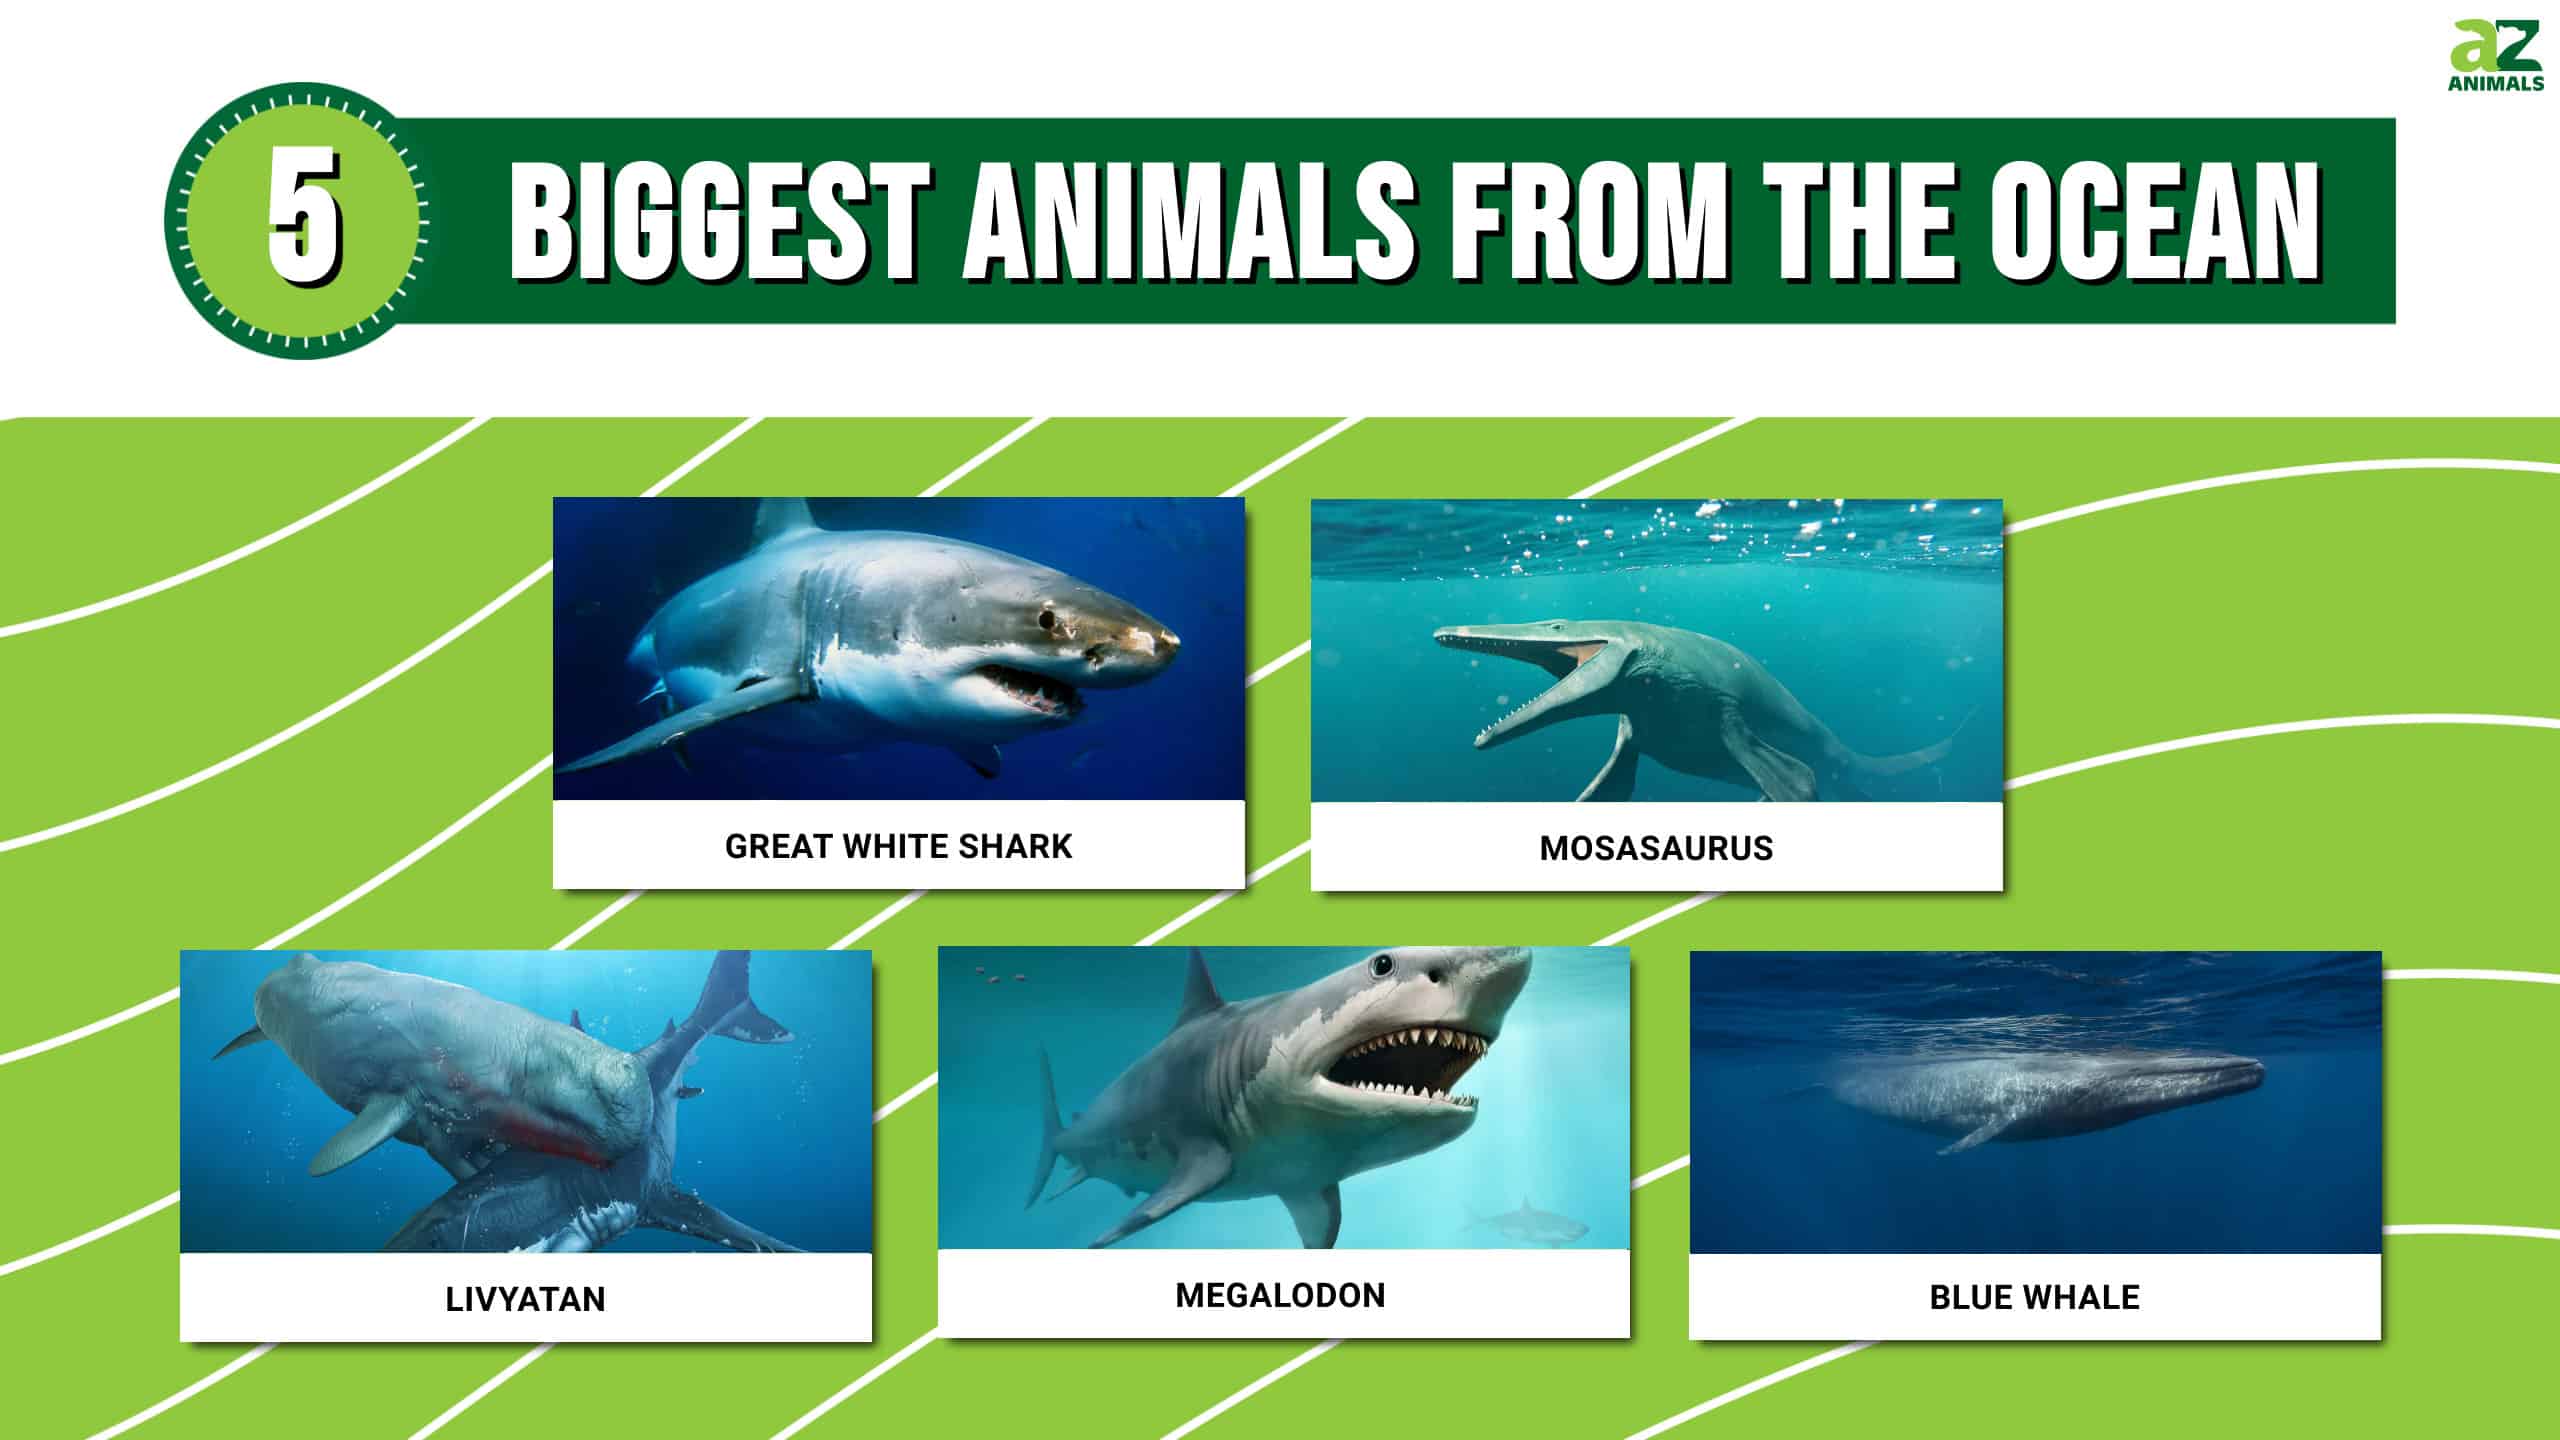 Biggest Animals From The Ocean infographic